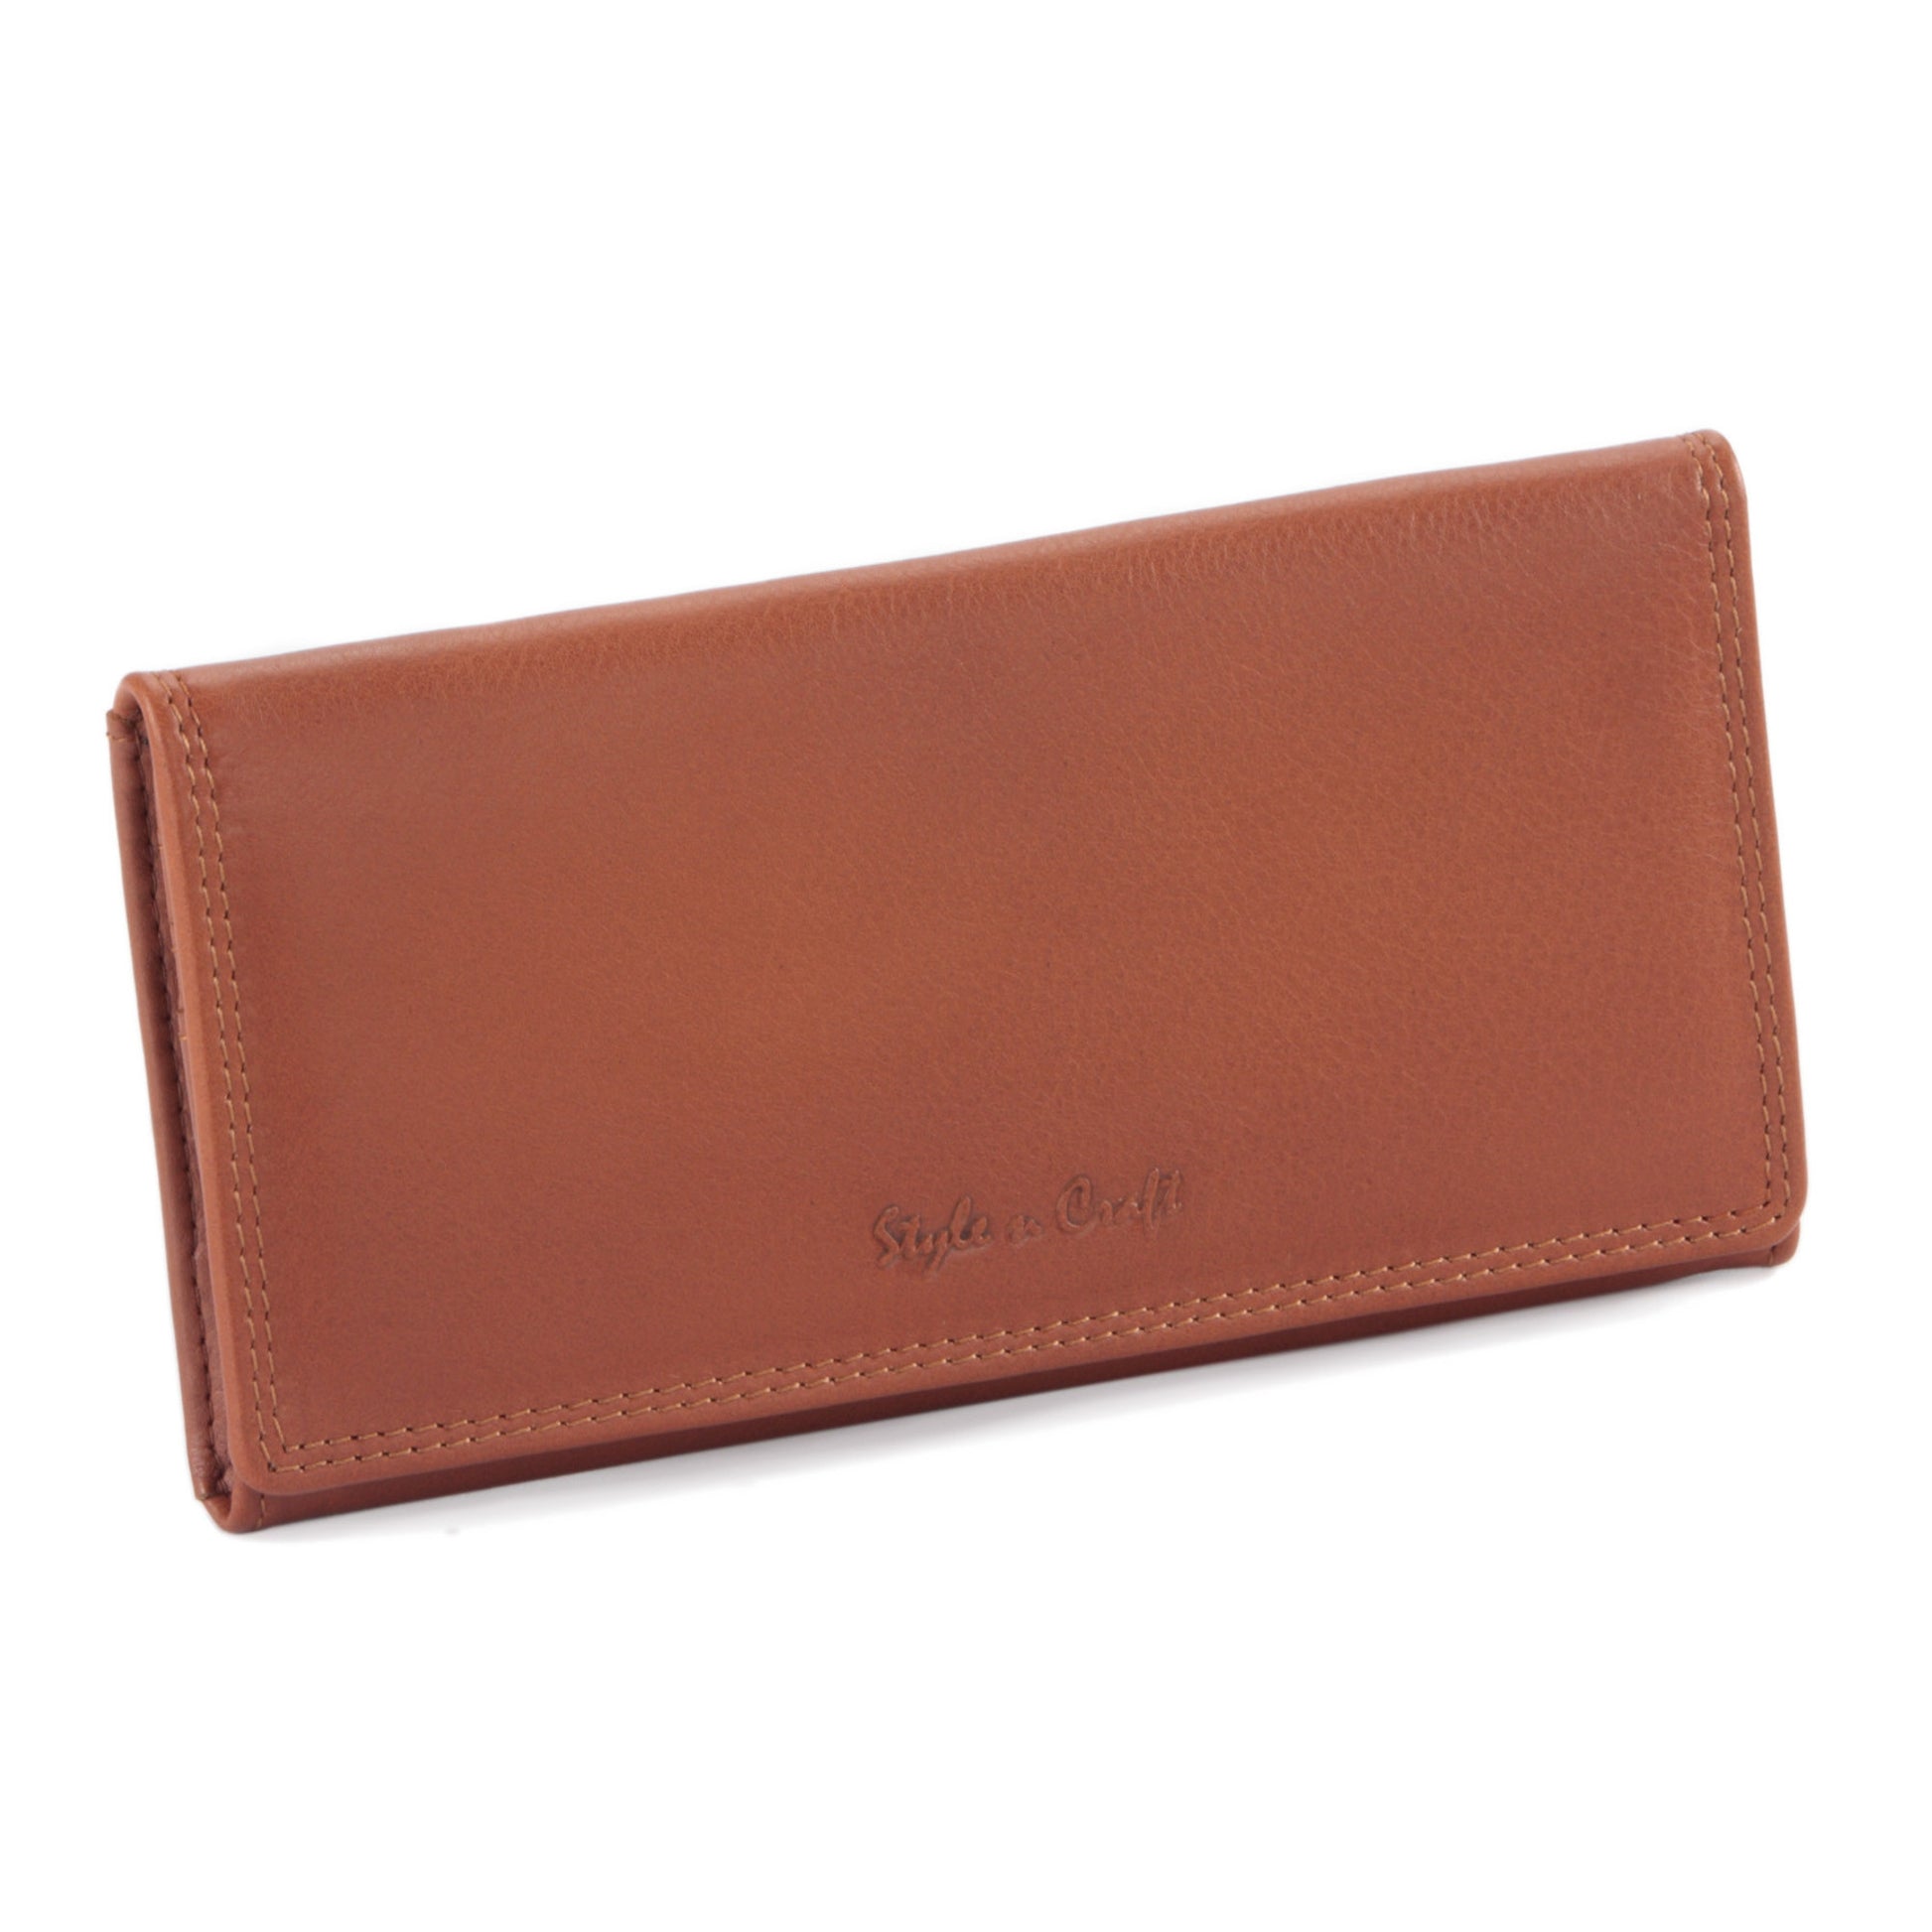 Style n Craft - 300965-CG Ladies Clutch Wallet in Leather - cognac or tan color - closed view front